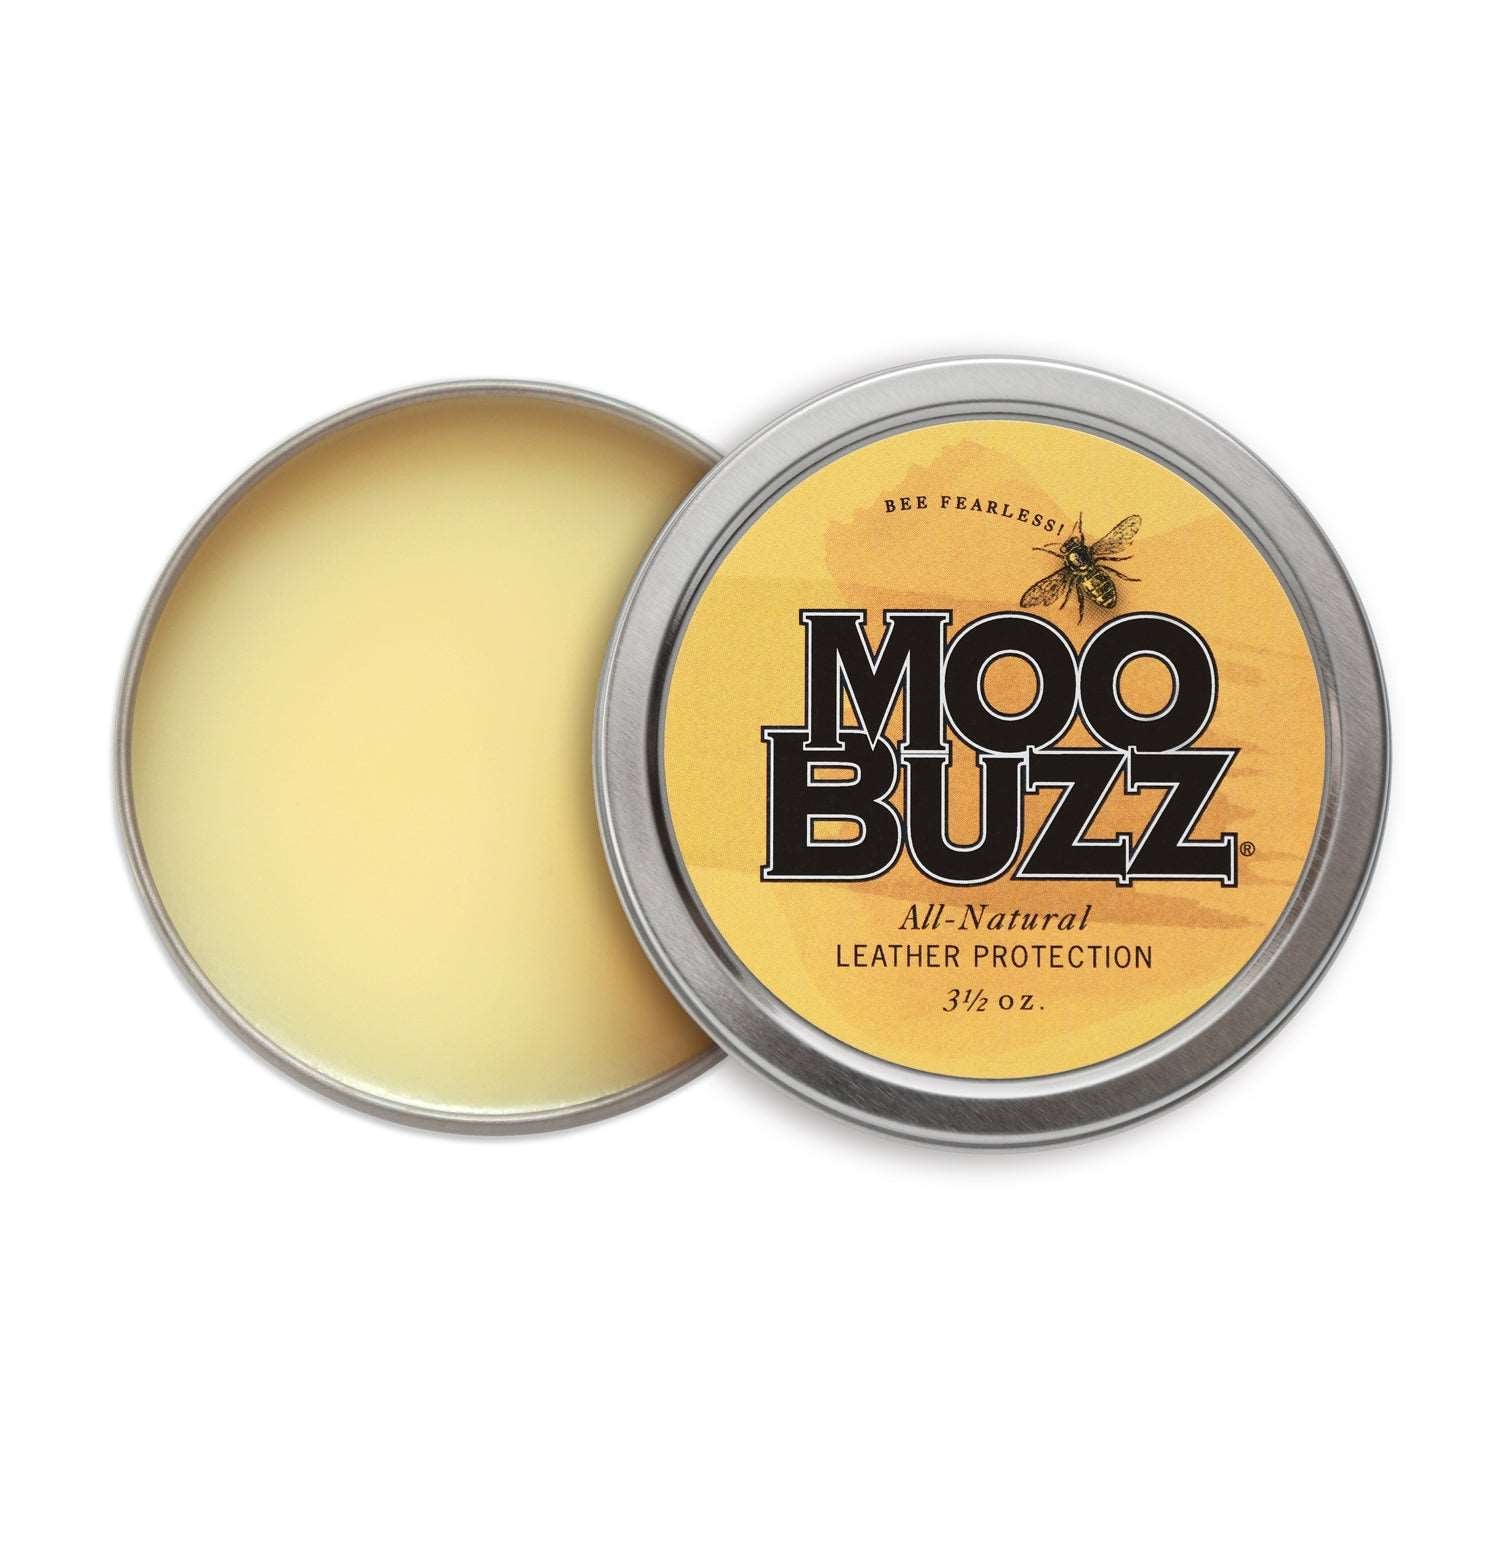 Open tin with MooBuzz logo and all-natural leather protection